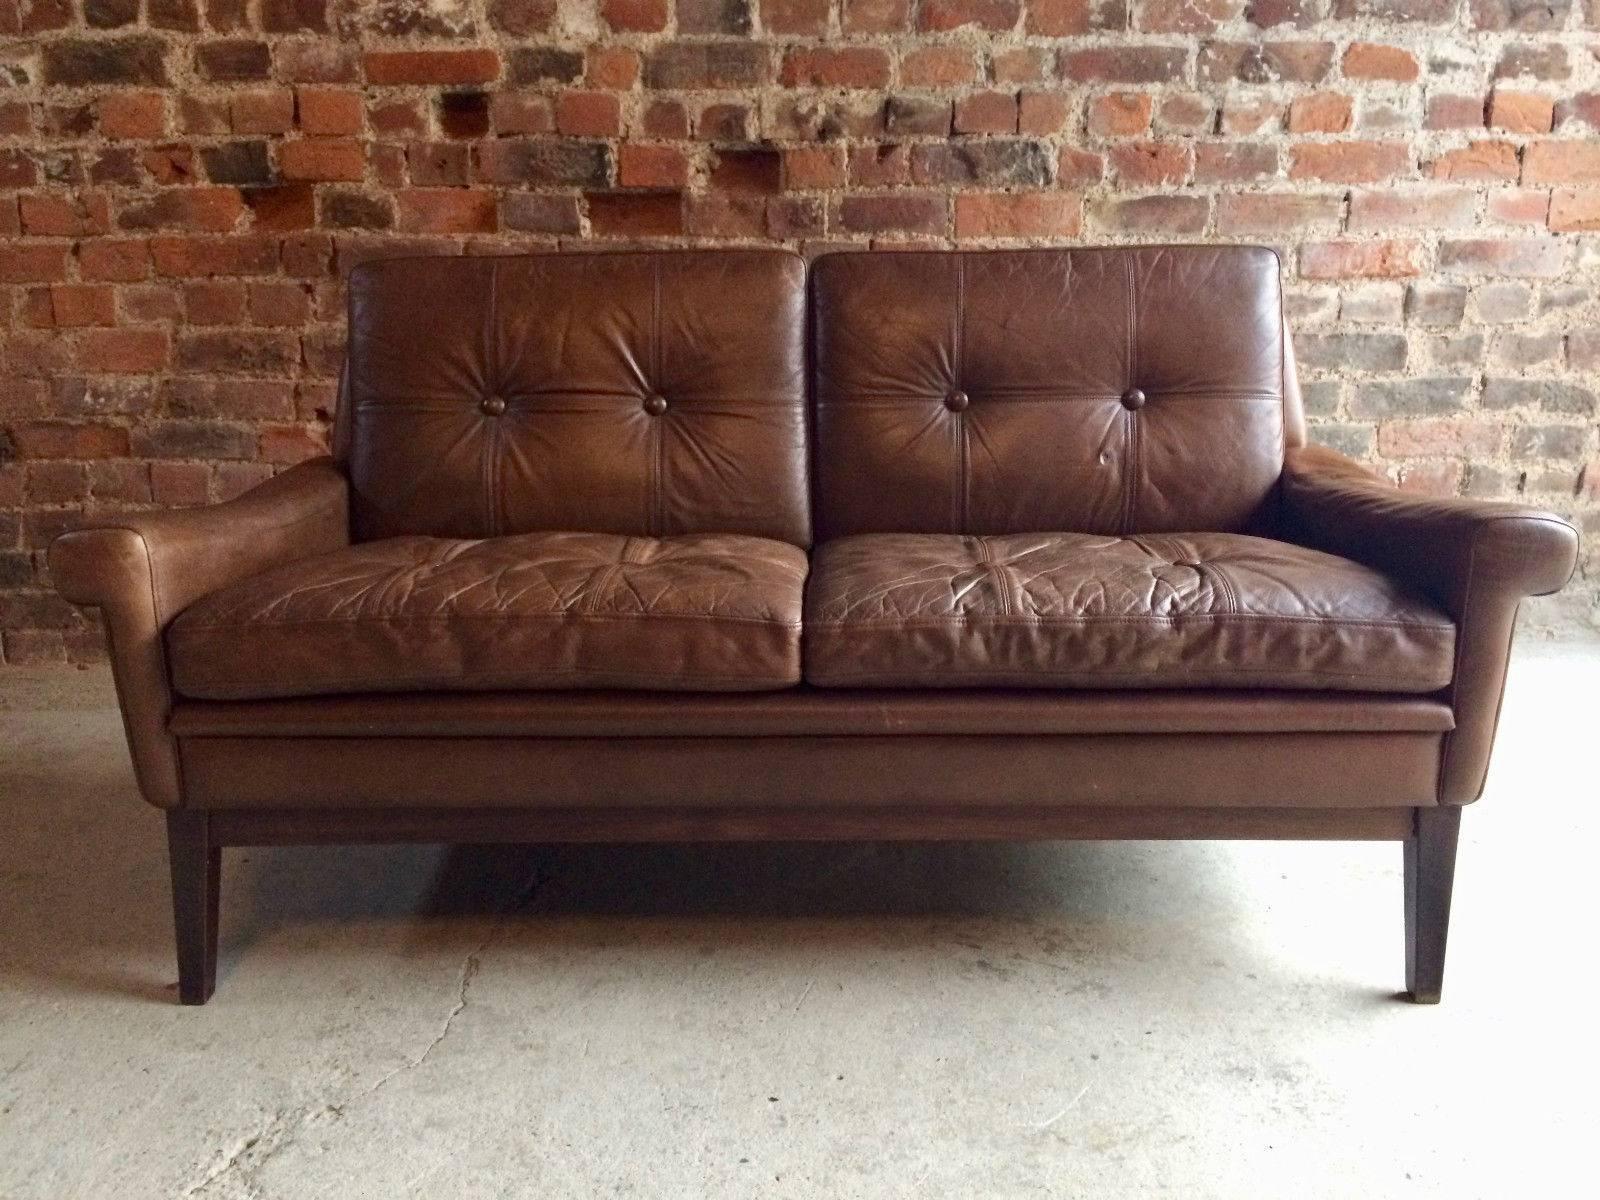 A magnificent stylish midcentury Danish brown leather two-seat settee, by Skipper Møbler, circa 1970s, upholstered in soft chocolate brown leather raised on teak tapering legs.
    